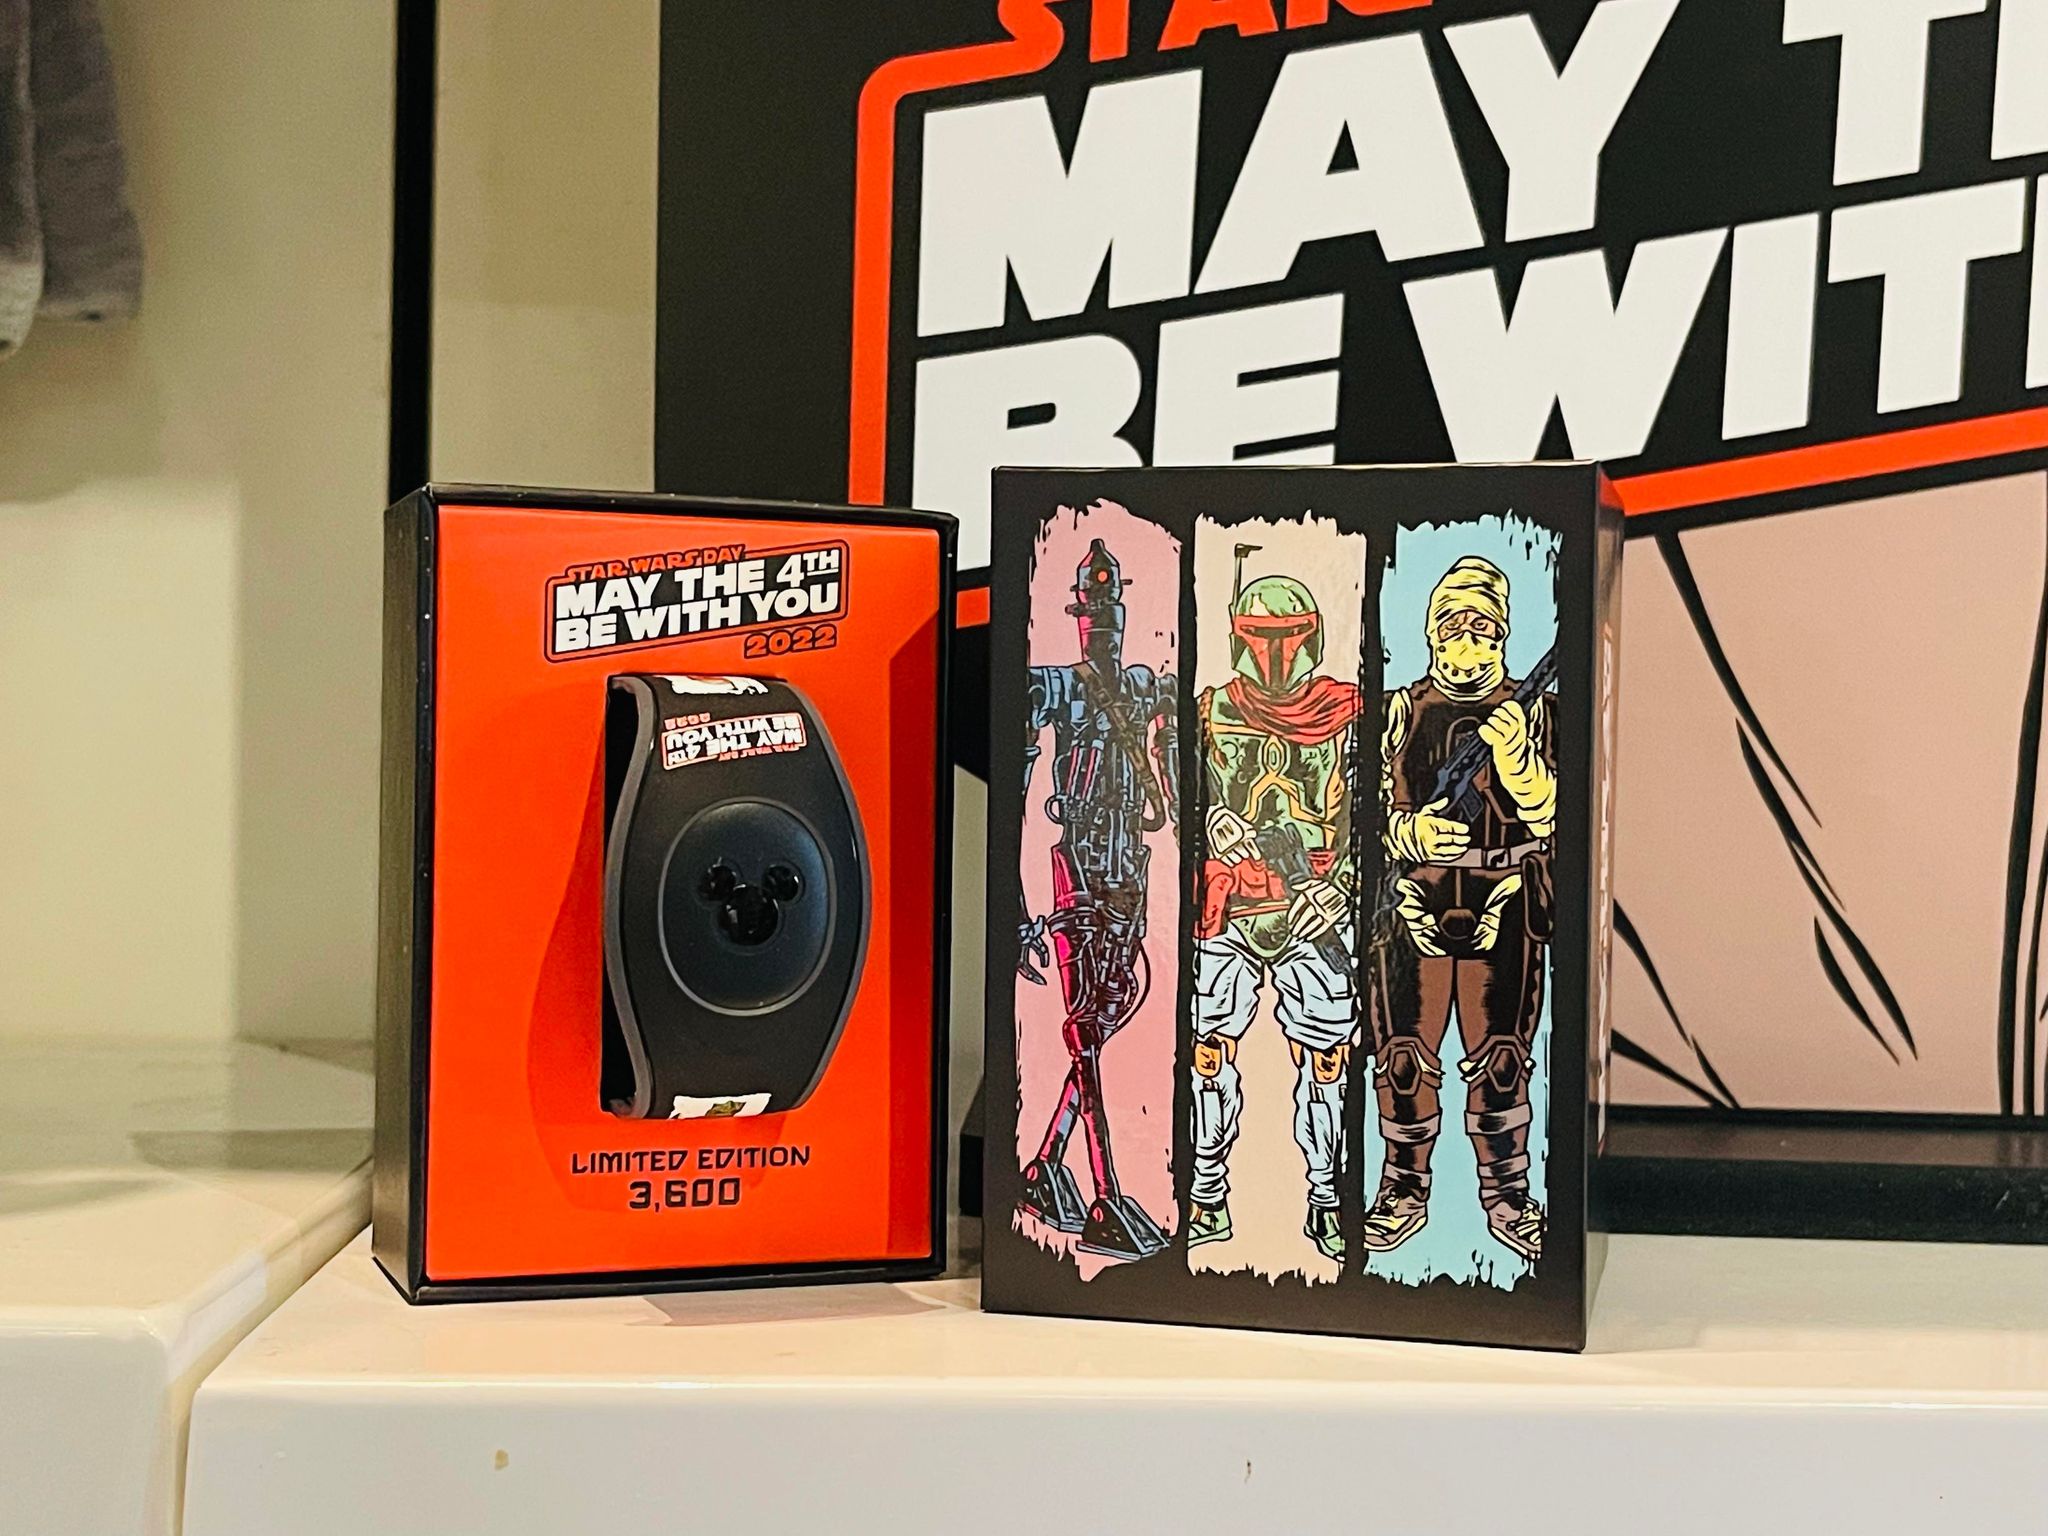 Retired LR Magic Band Luke Skywalker Disney May The 4th Be With You 